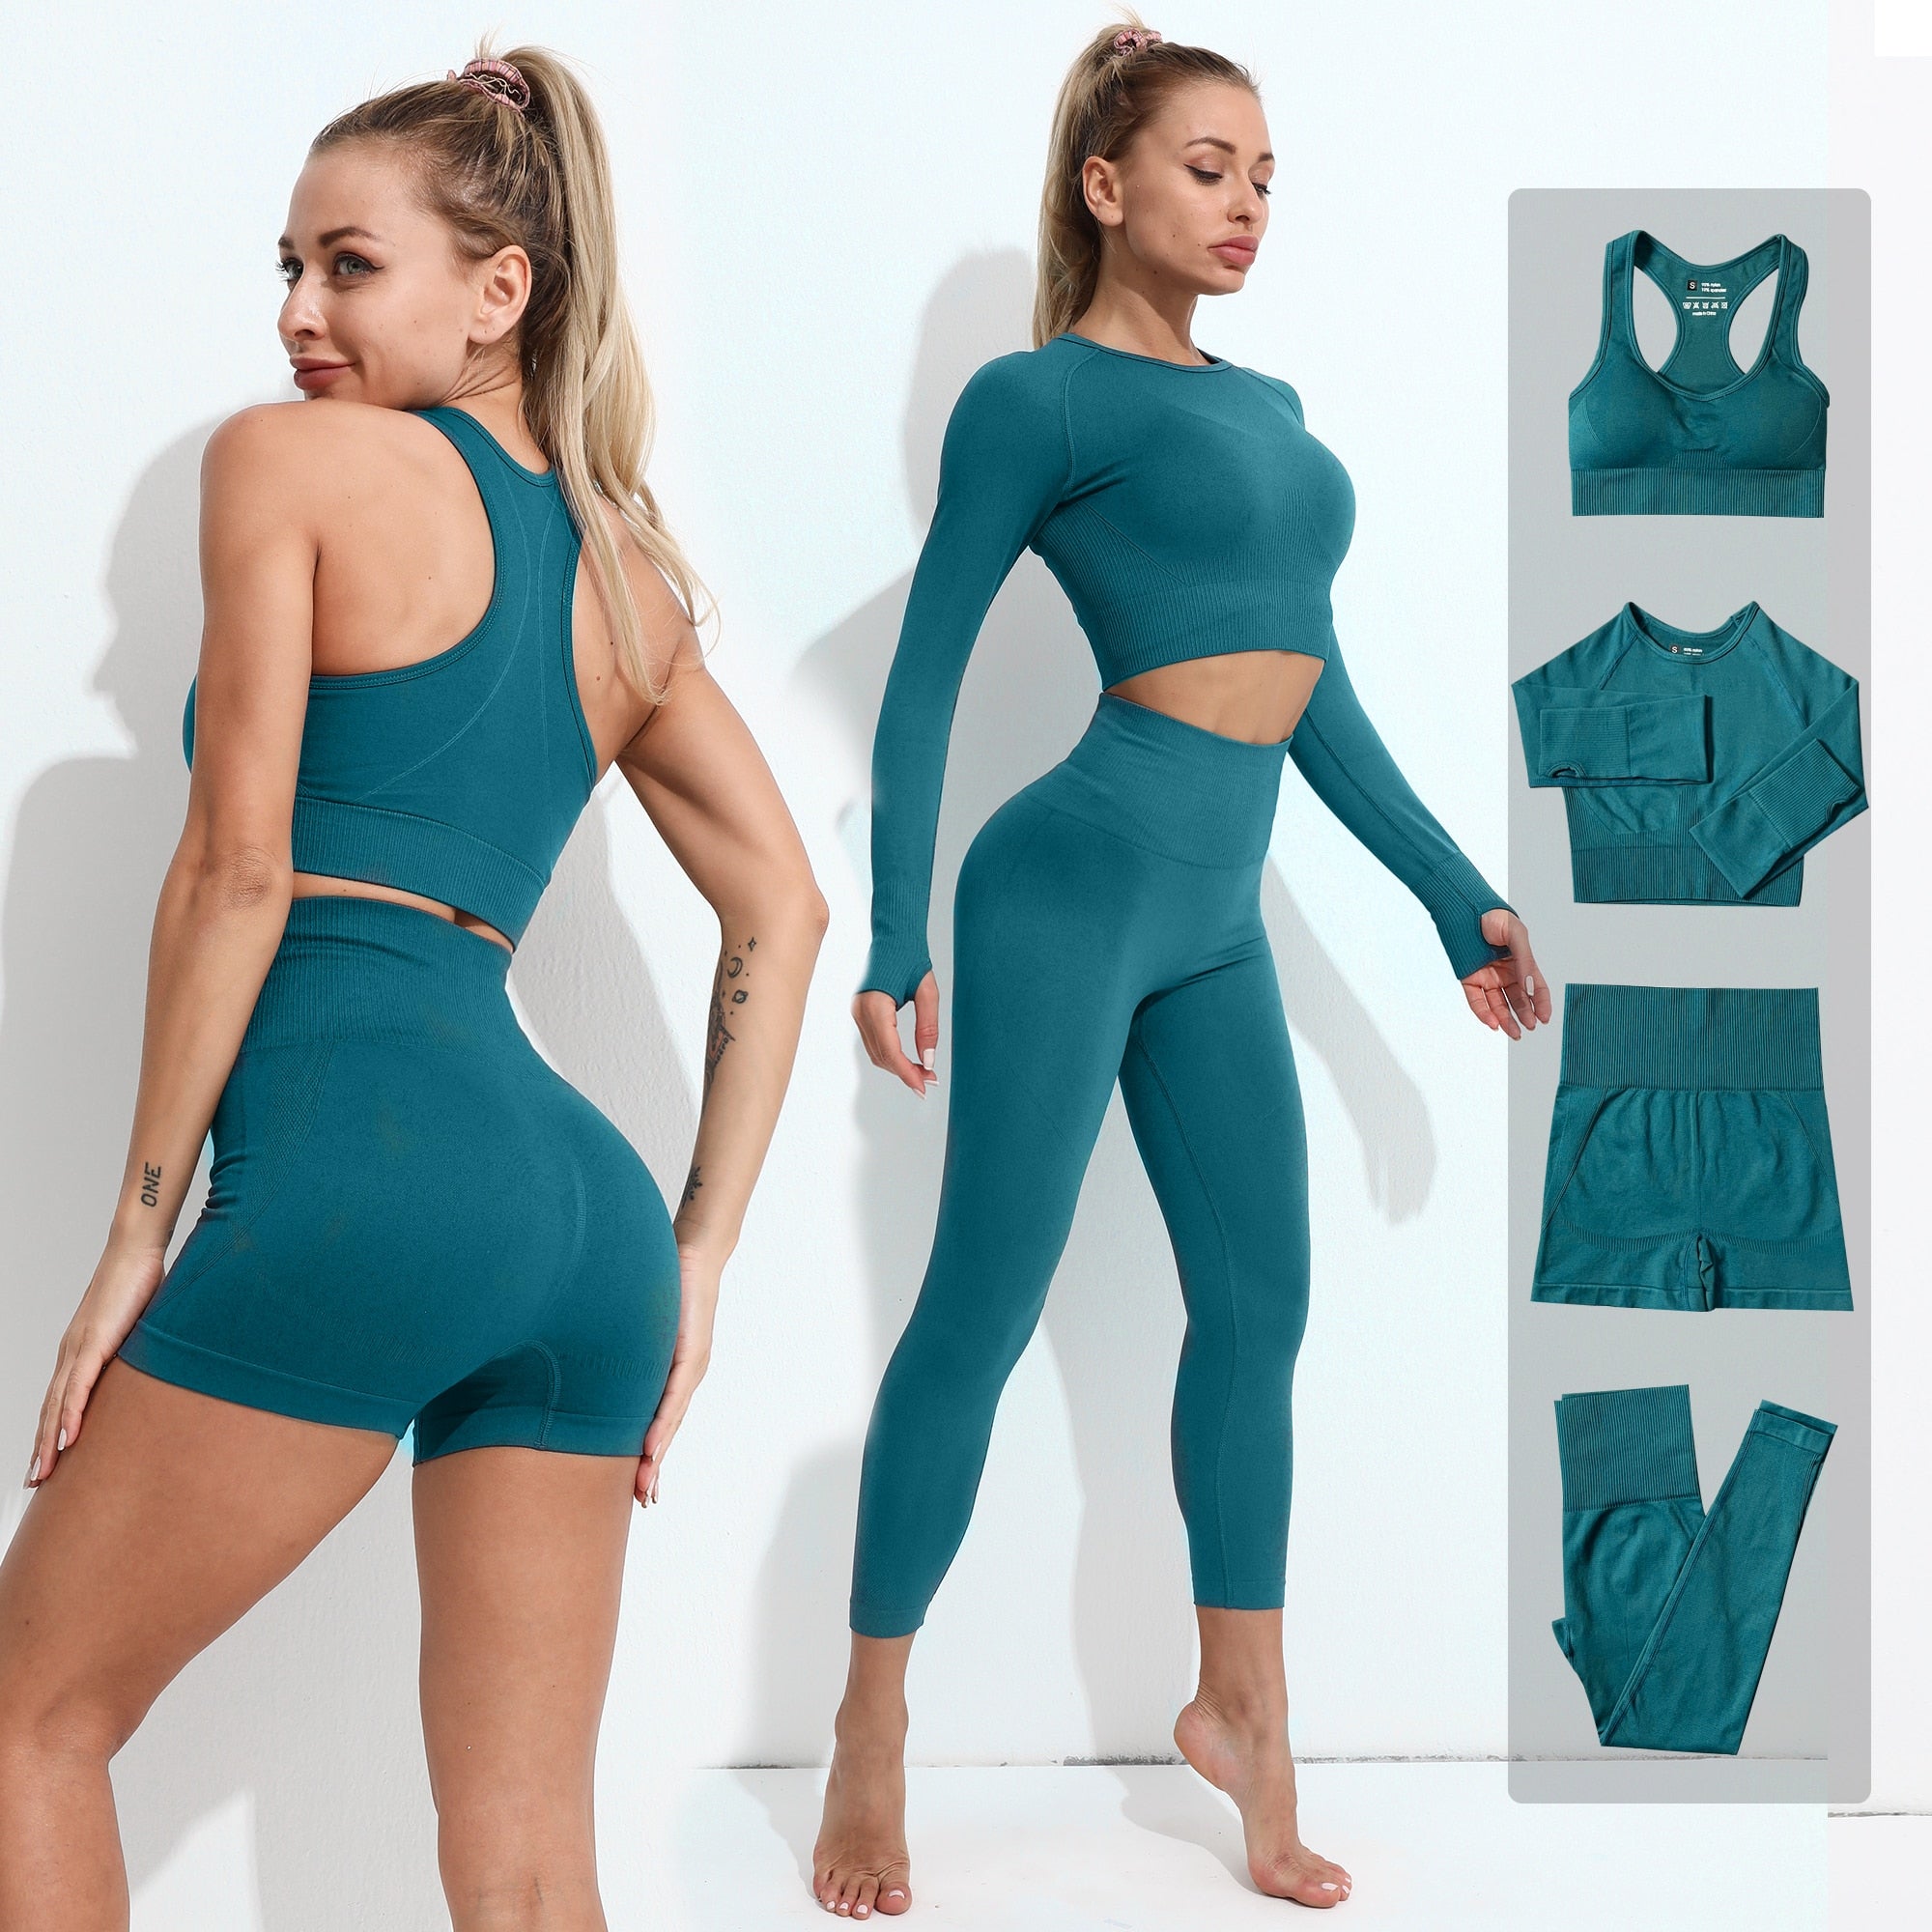 Women Sportswear Workout Clothes for Women Sport Sets Suits for